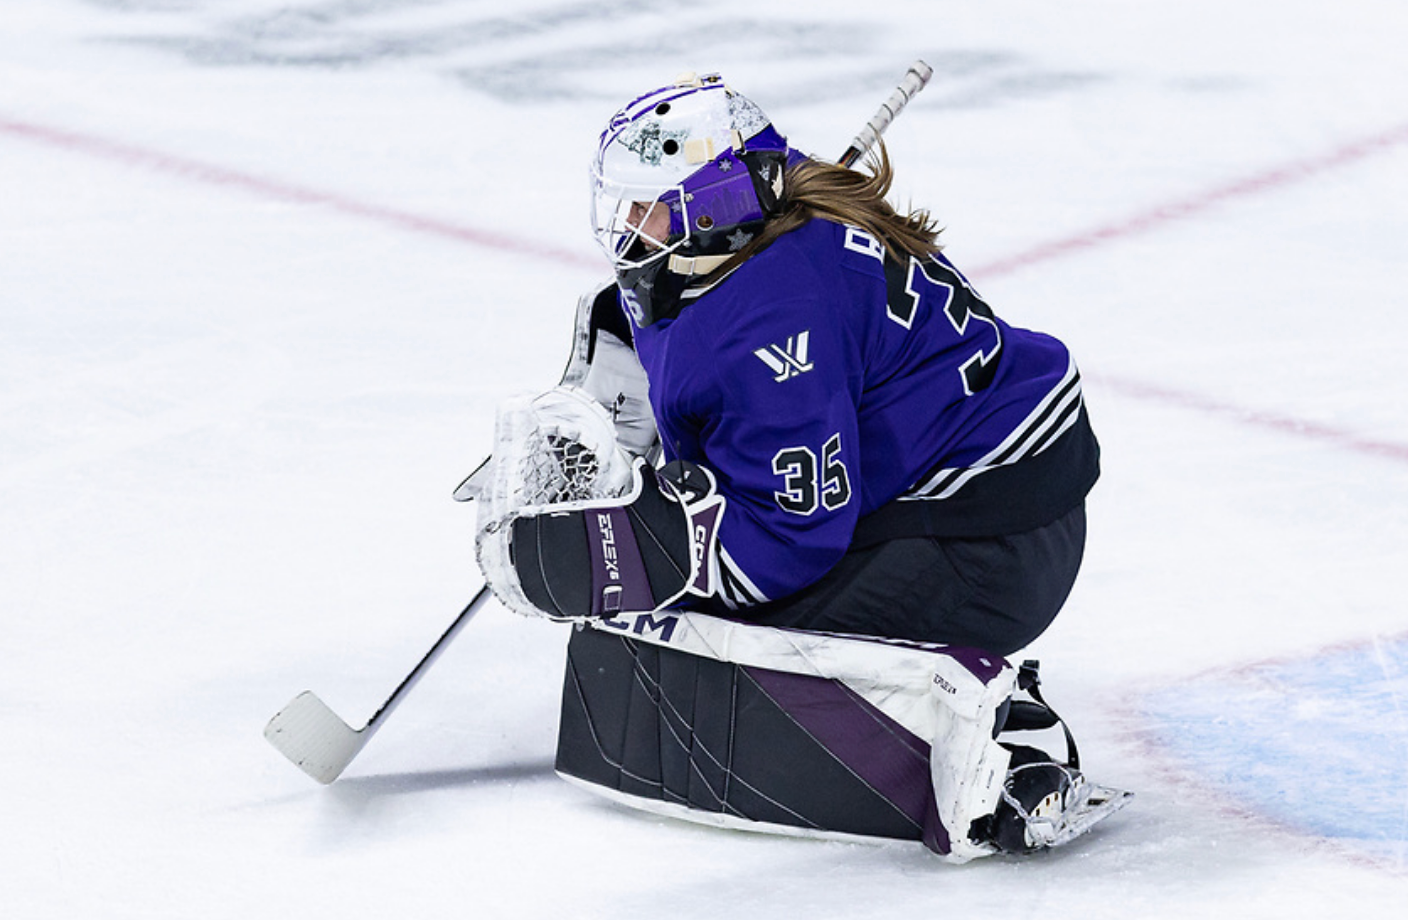 Rooney squeeze her knees together from the butterfly position to make a save. She is in her purple/black Minnesota pads and a purple home uniform.